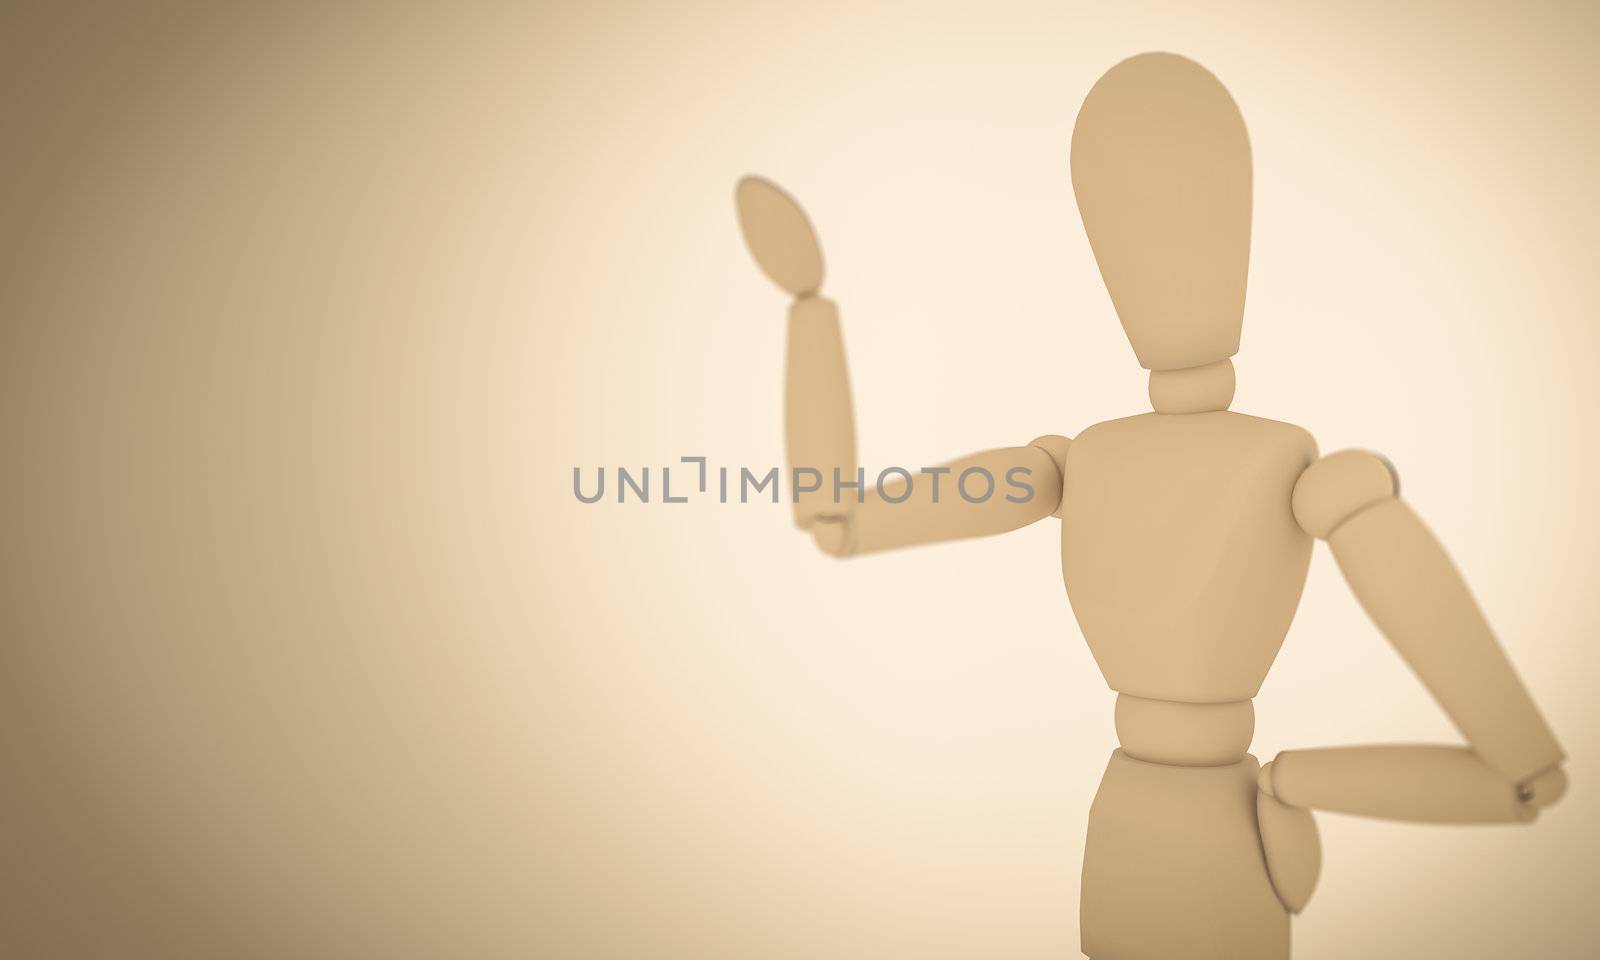 A CGI image of a wooden mannequin posing on a light brown background.